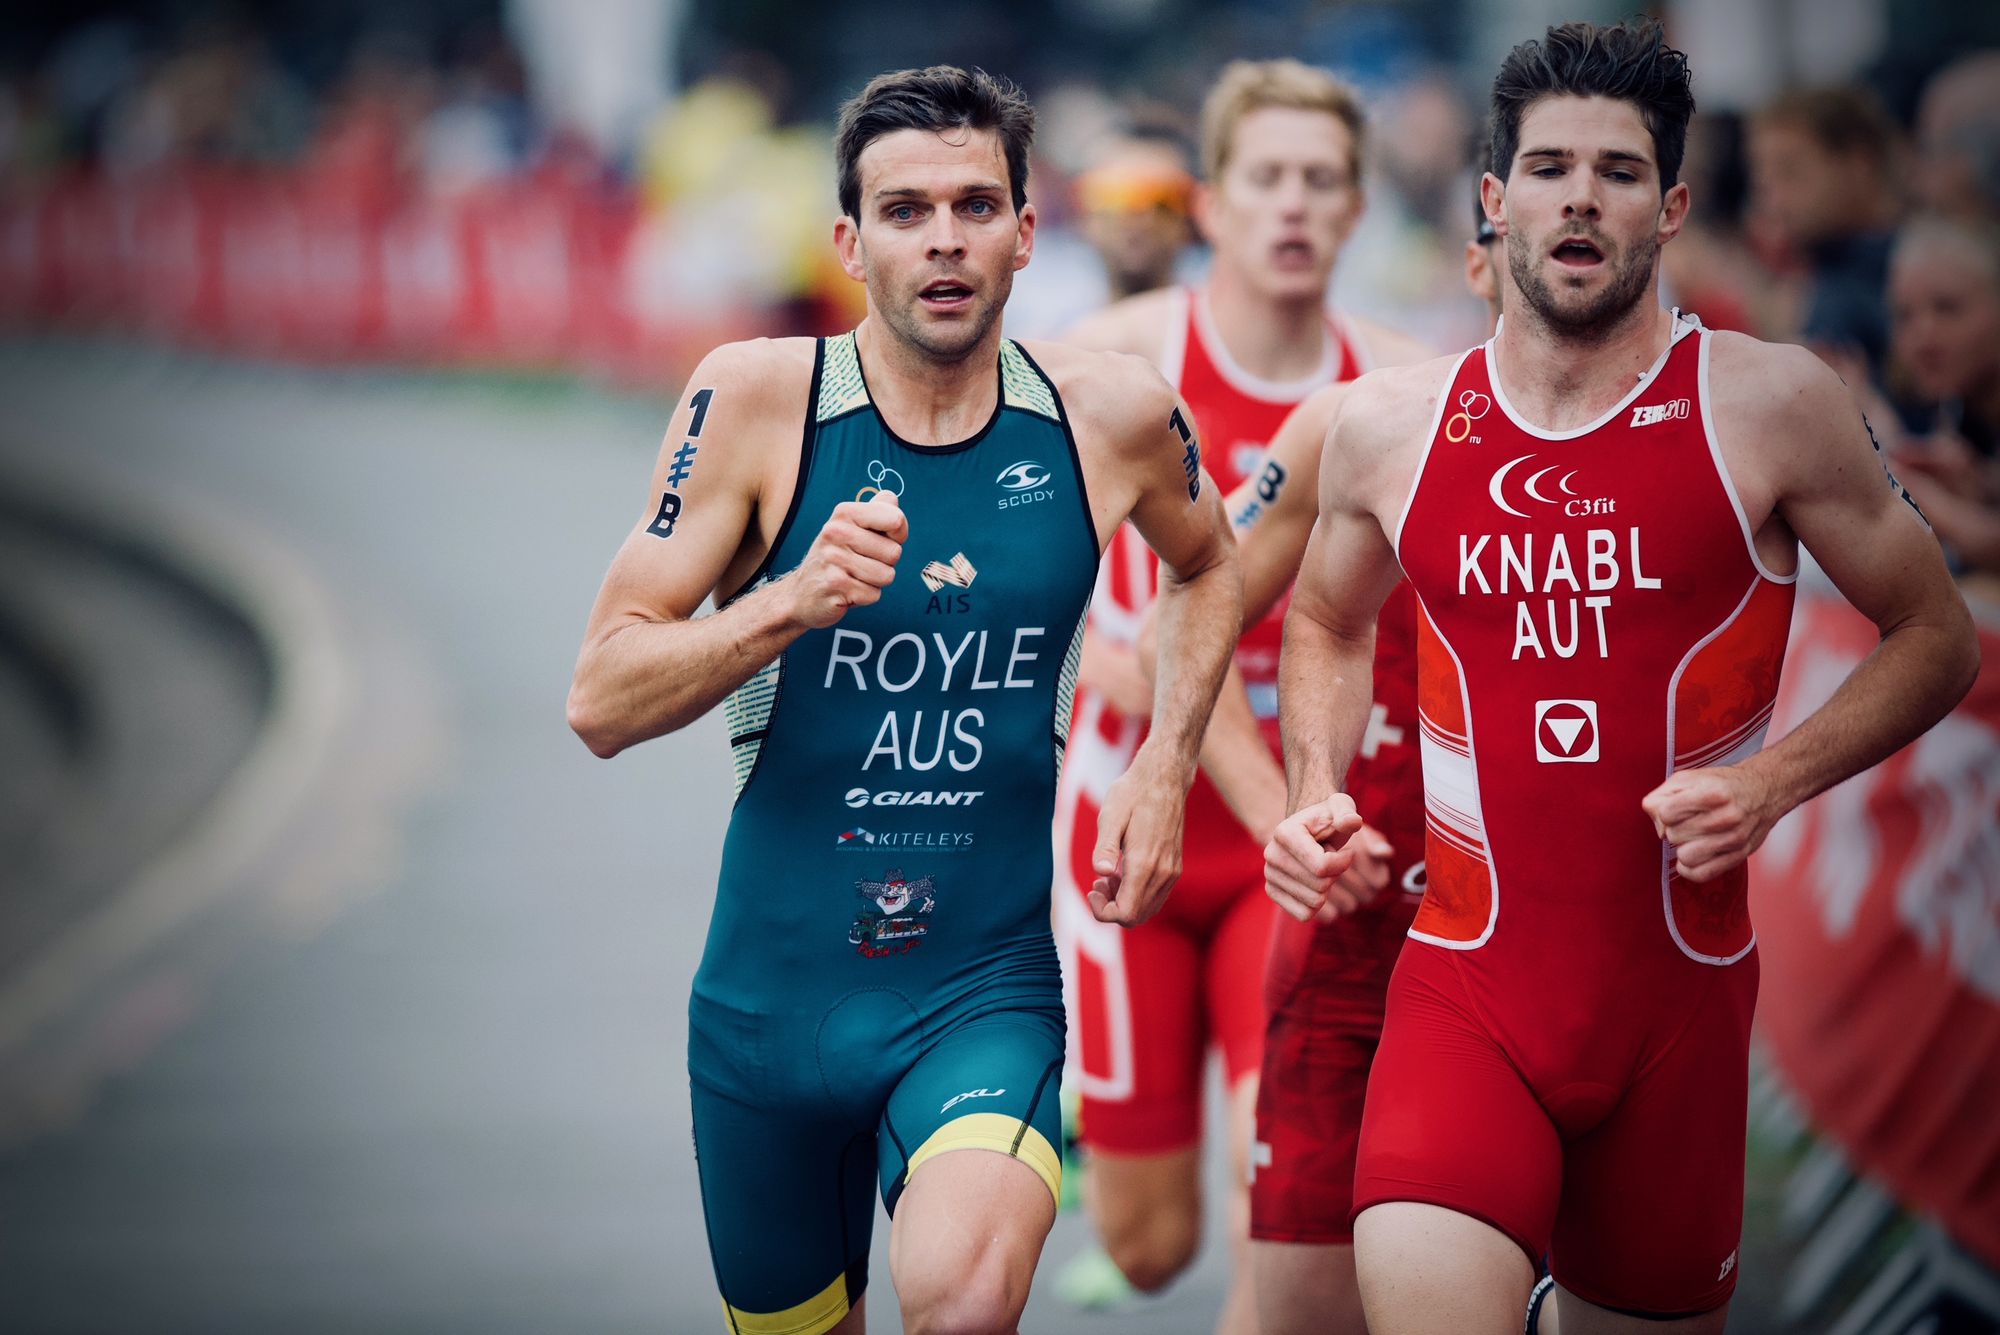 A Relay in Nottingham and a WTS race in Leeds